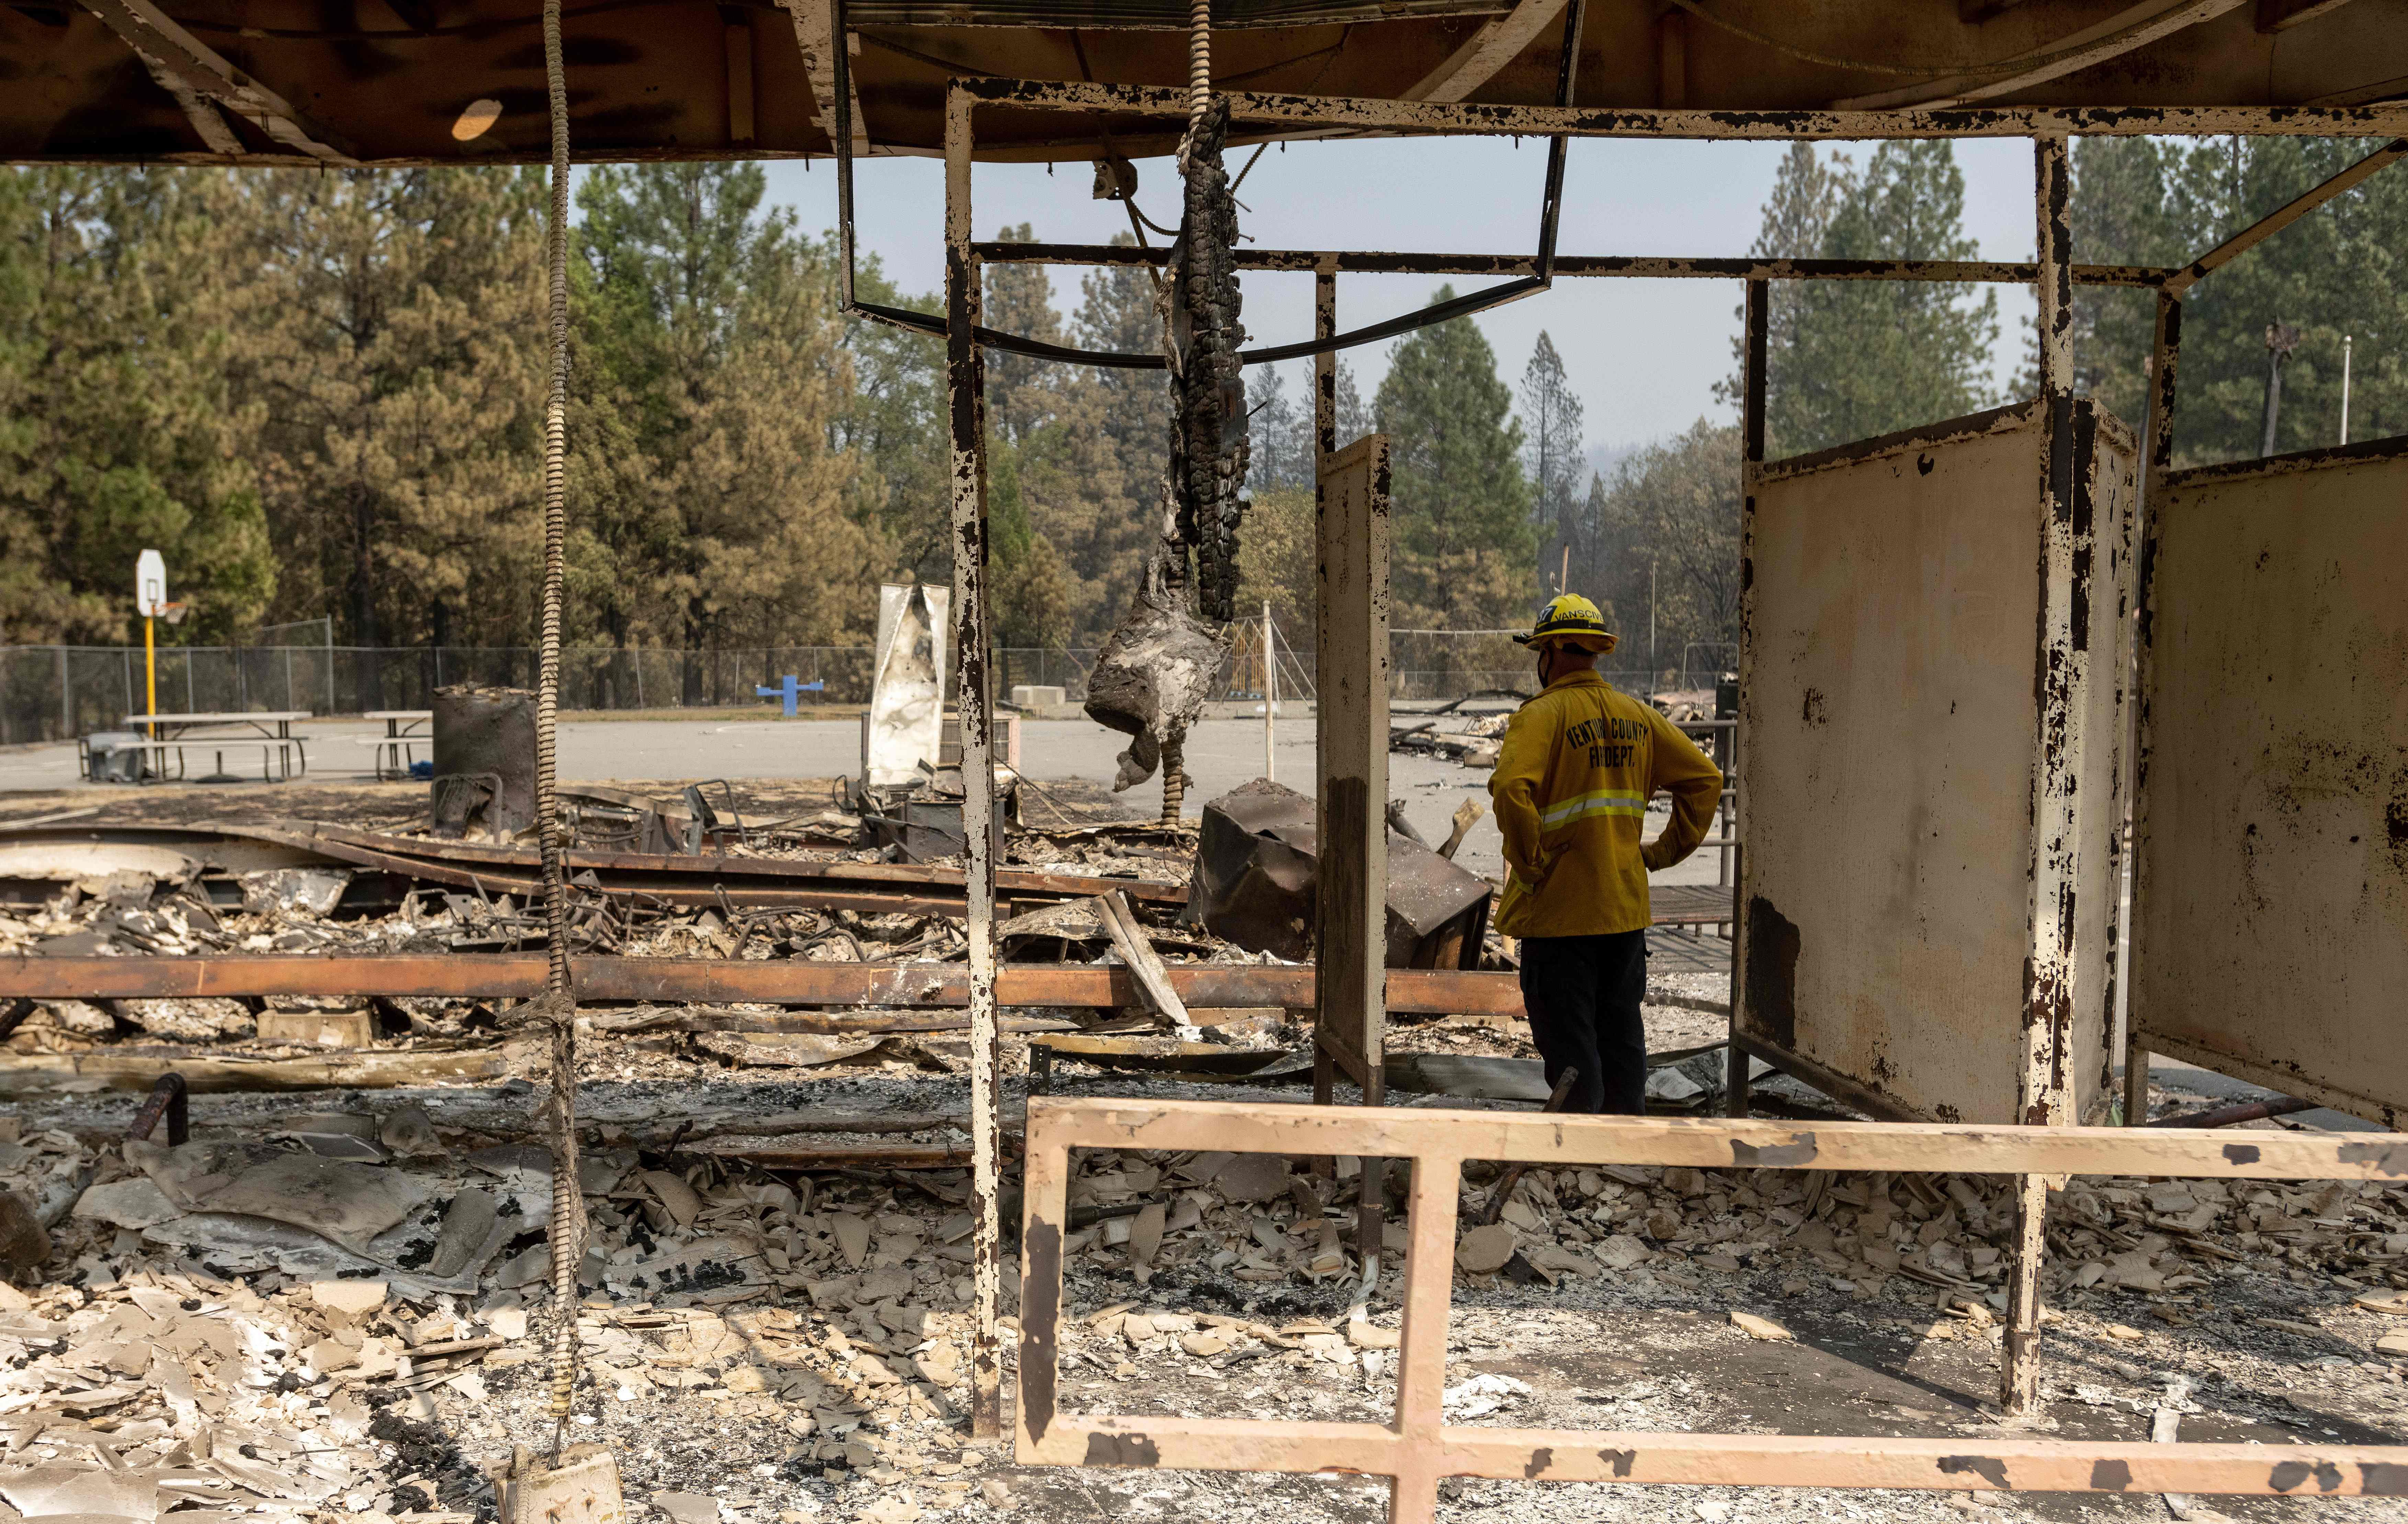 A firefighter surveys the burned remains of Berry Creek School in California on September 14, 2020.